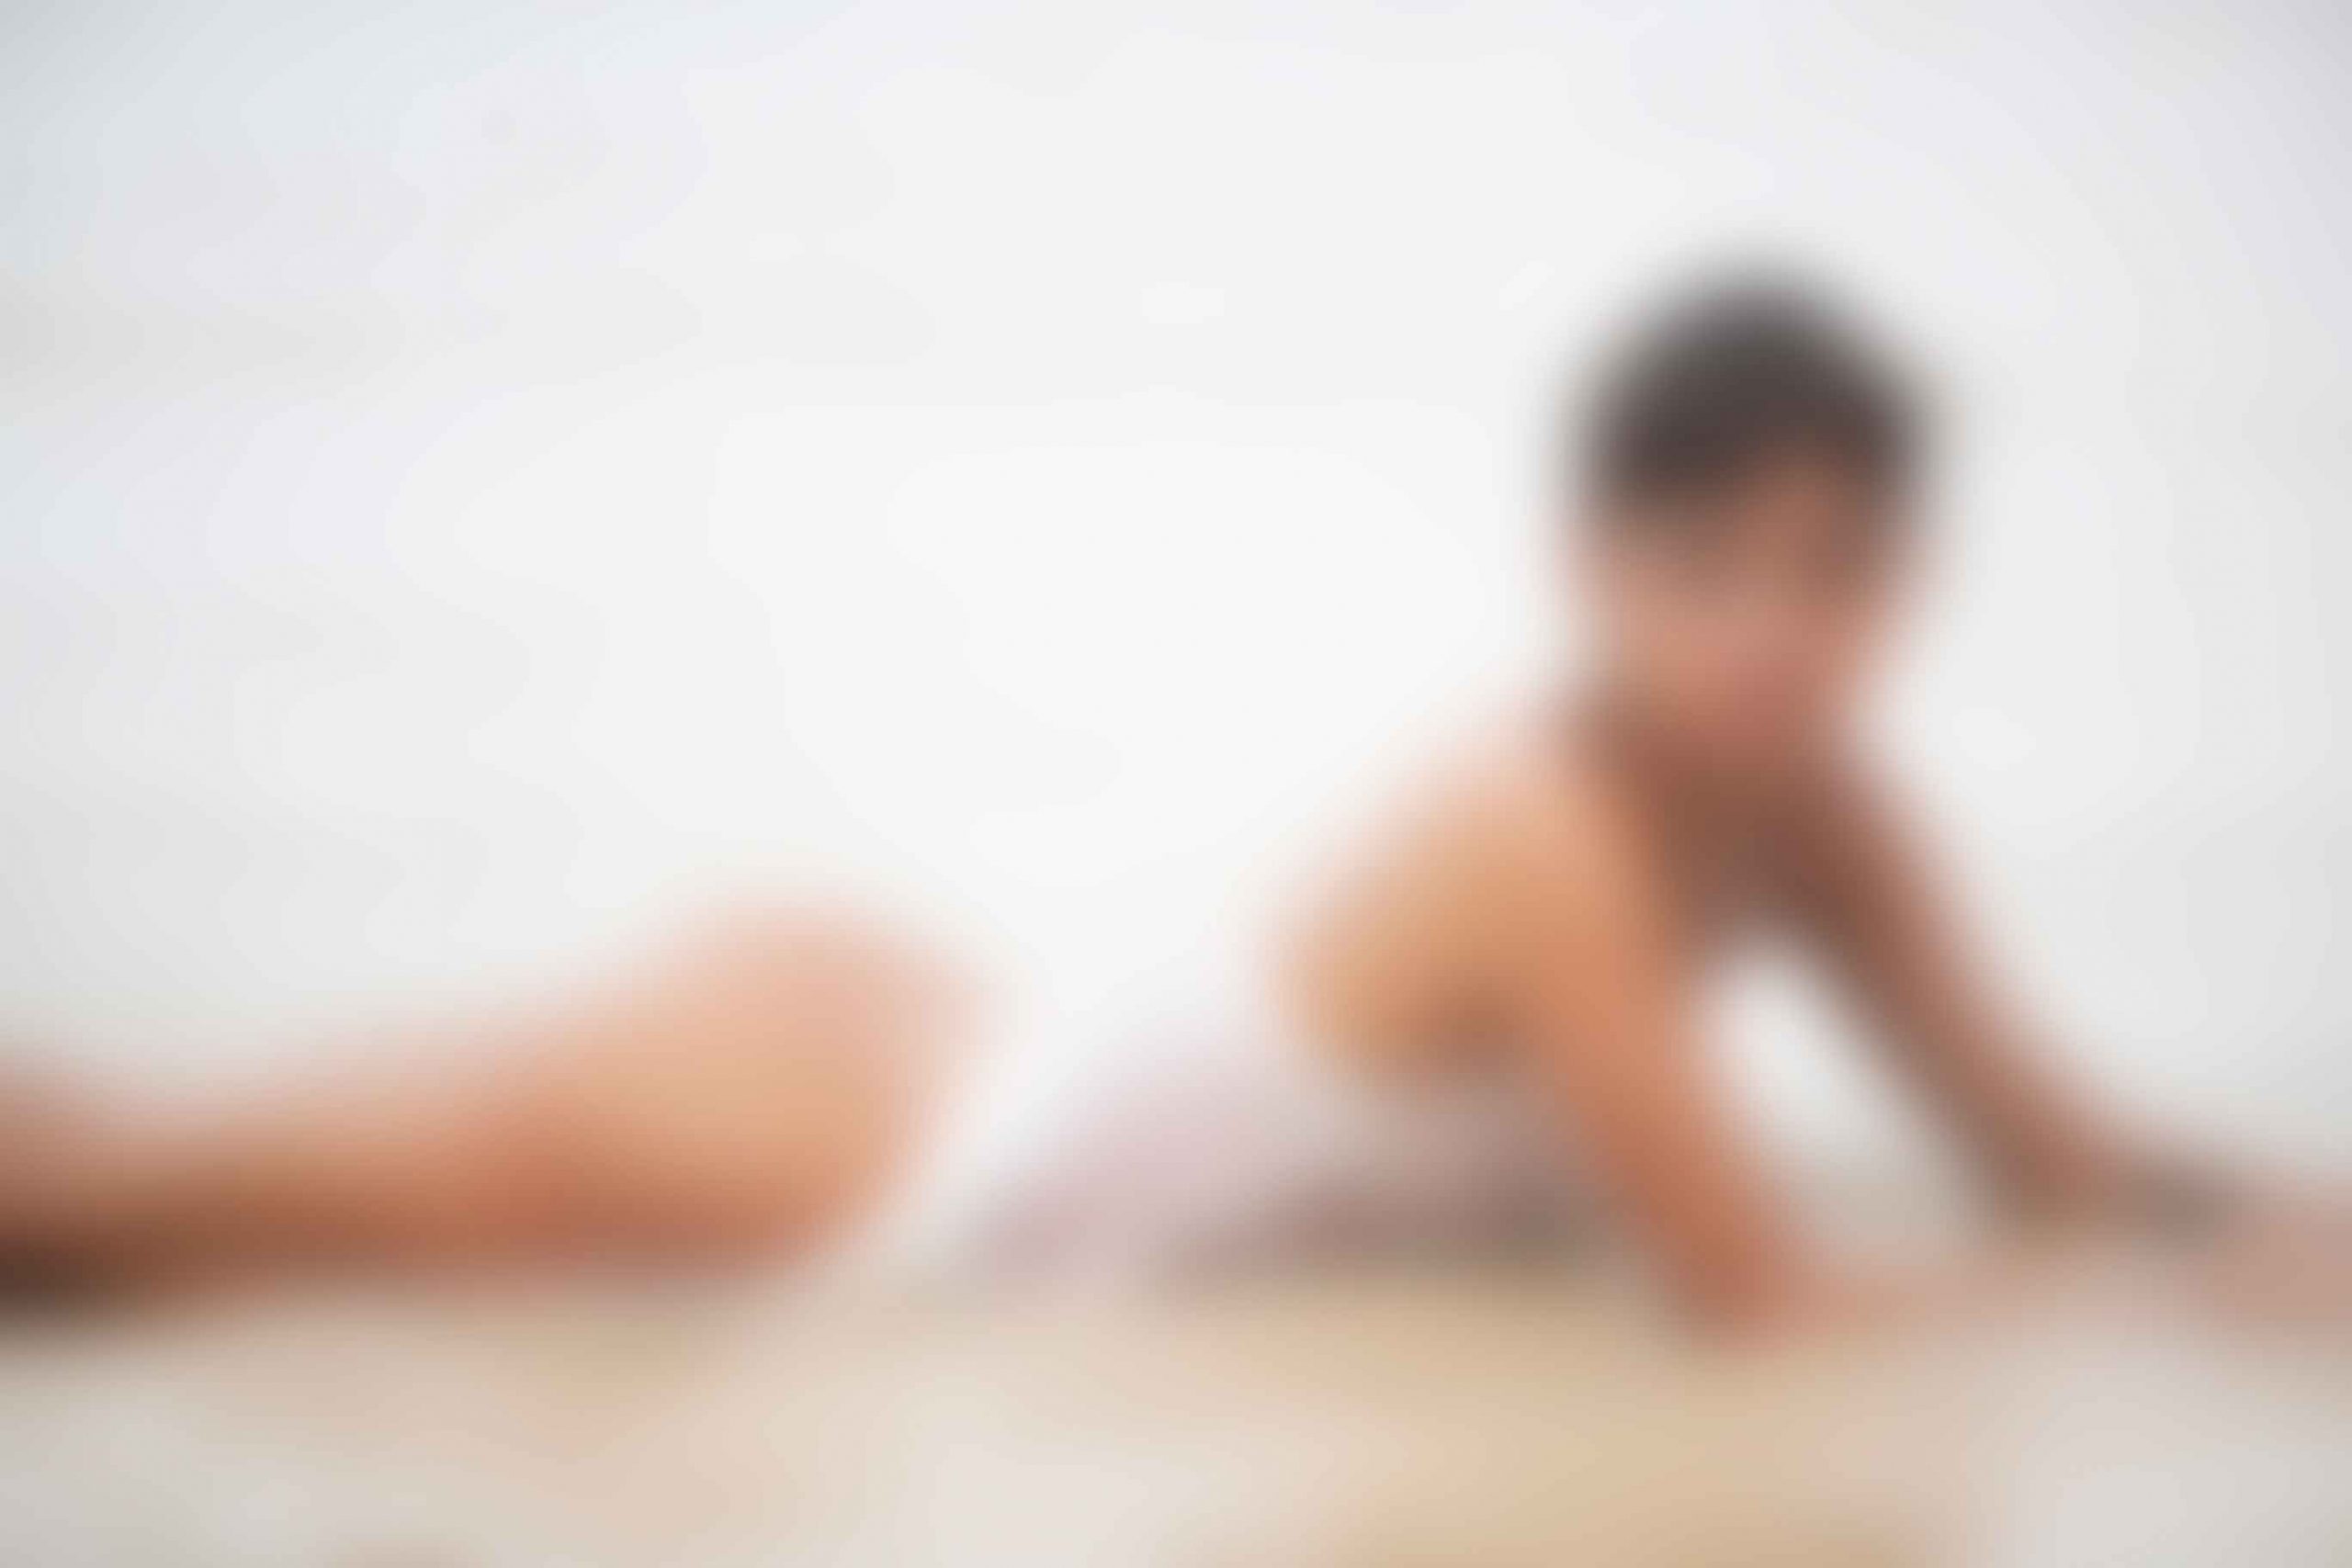 blurred content